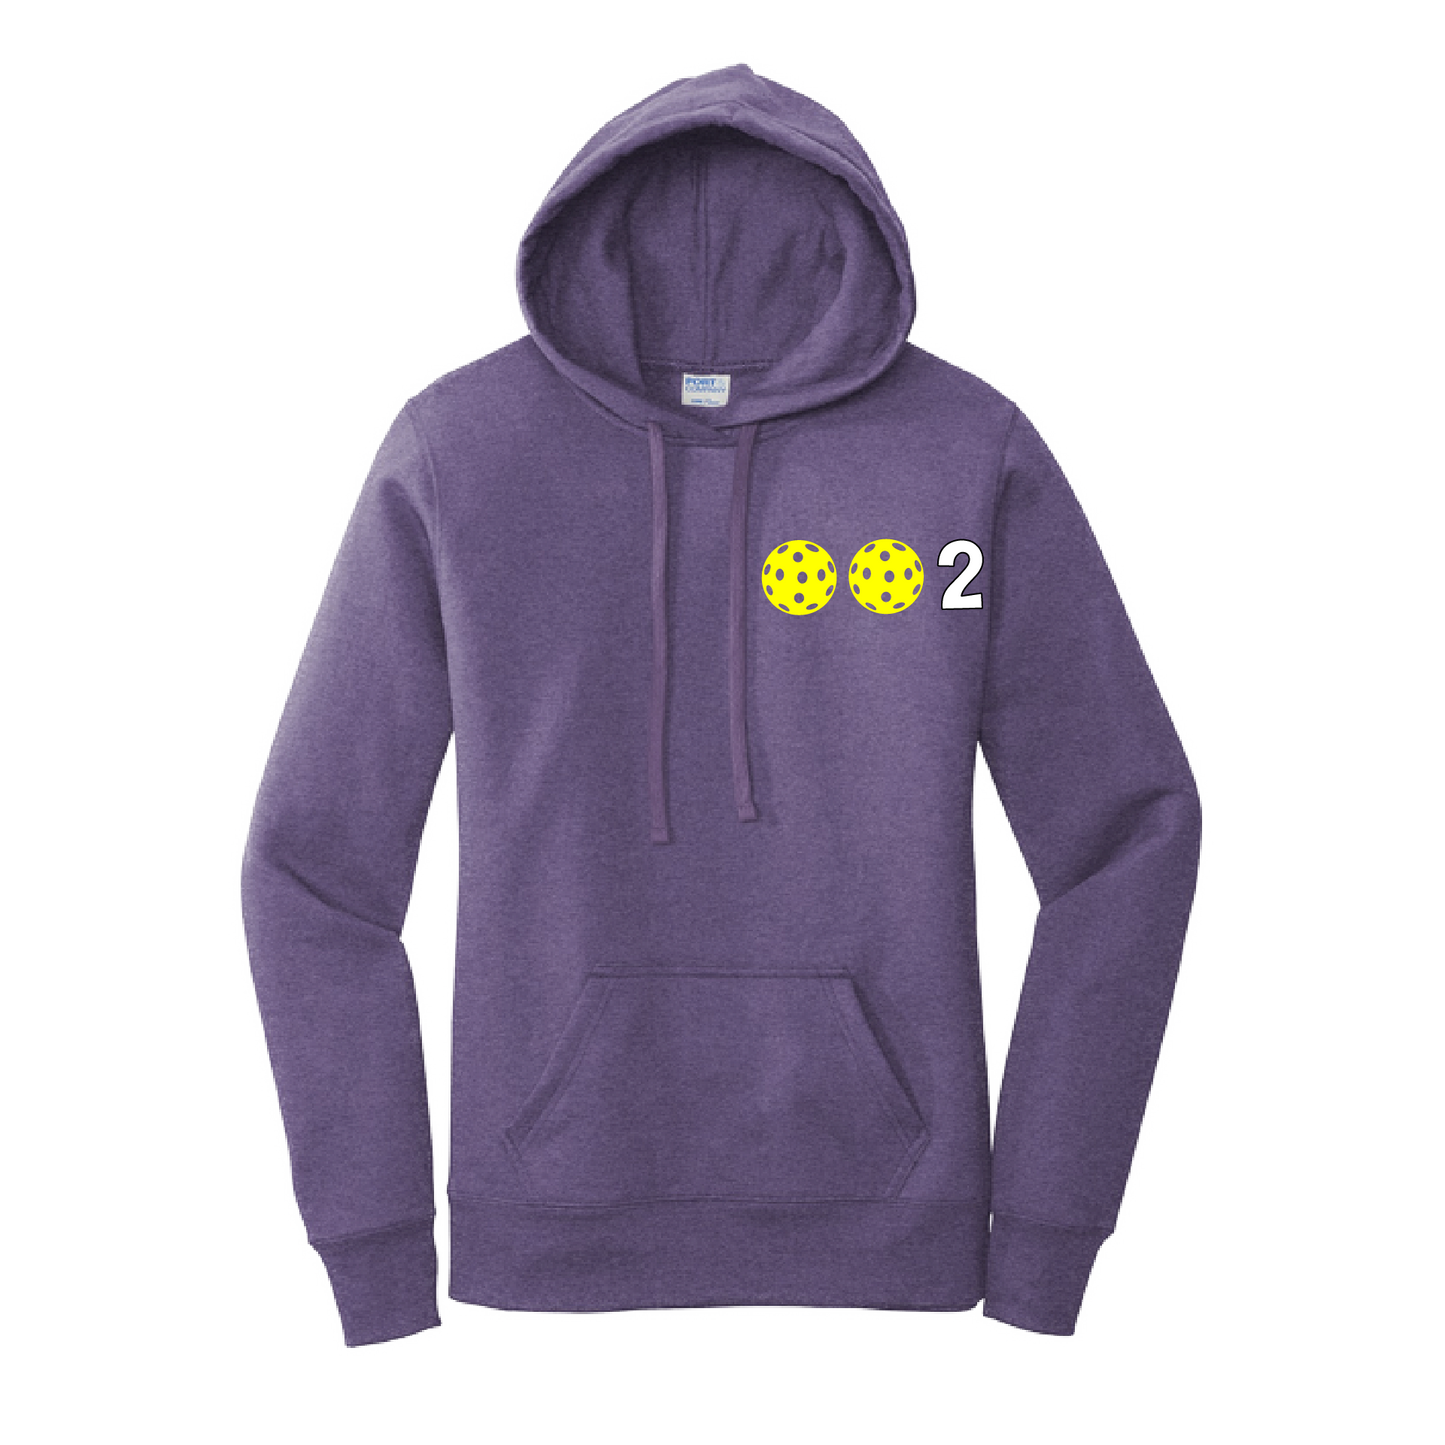 Design: 002 with Customizable Ball color (Yellow, White, Pink, Orange, Purple)  Women's Hooded pullover Sweatshirt: 50/50 Cotton/Poly fleece.  Turn up the volume in this Women's Sweatshirts with its perfect mix of softness and attitude. Ultra soft lined inside with a lined hood also. This is fitted nicely for a women's figure. Front pouch p